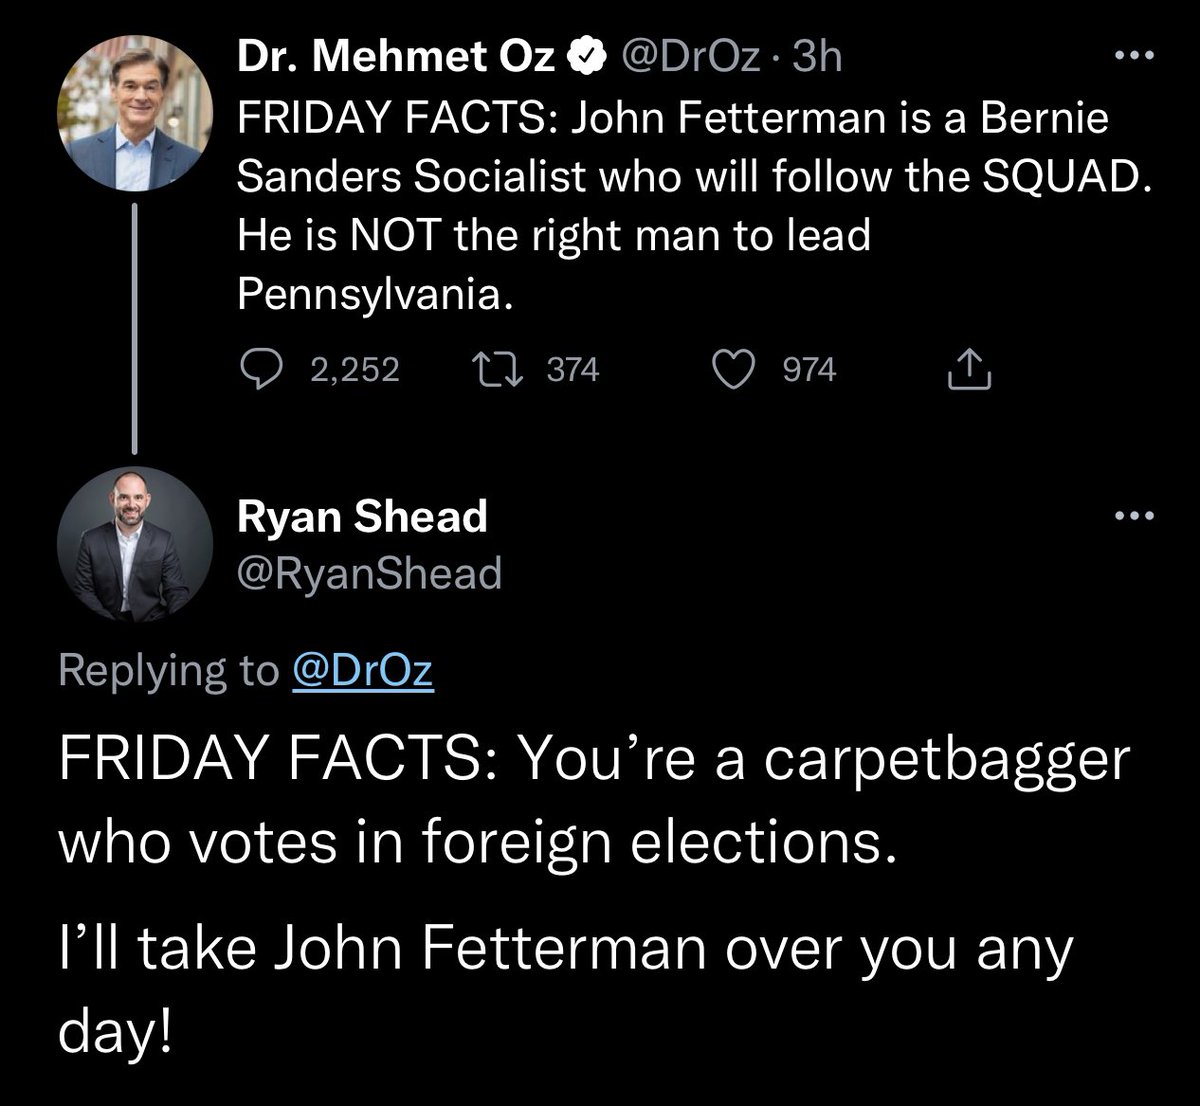 Mehmet Oz shouldn’t even be eligible for this seat. Foreign agents should not be allowed at the political table, especially right now. John Fetterman is the only option for Pennsylvania.